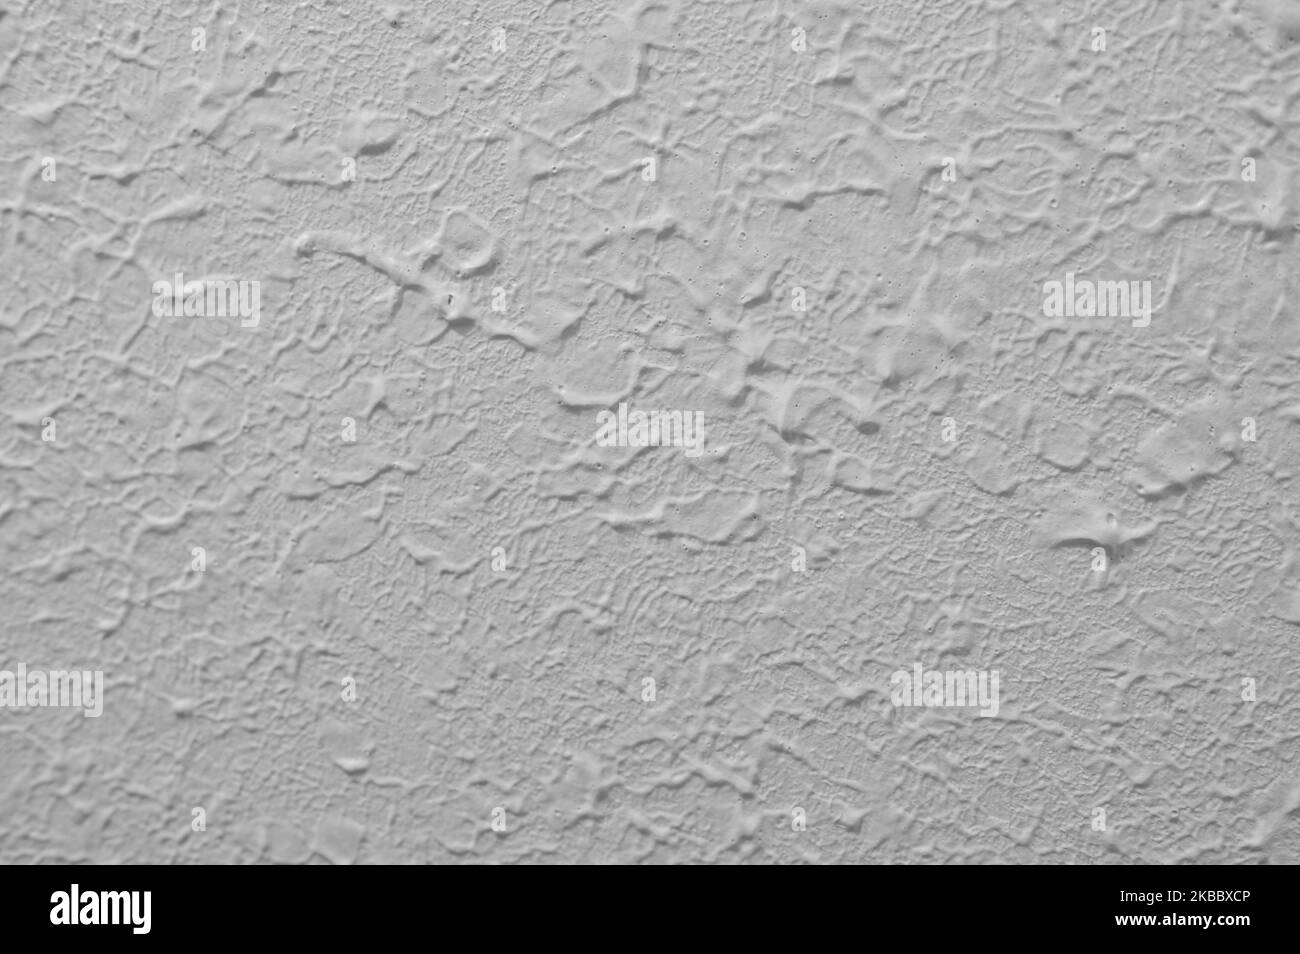 Stomp Knockdown Drywall Texture Techniques  Drywall texture, Ceiling  texture, Ceiling texture types